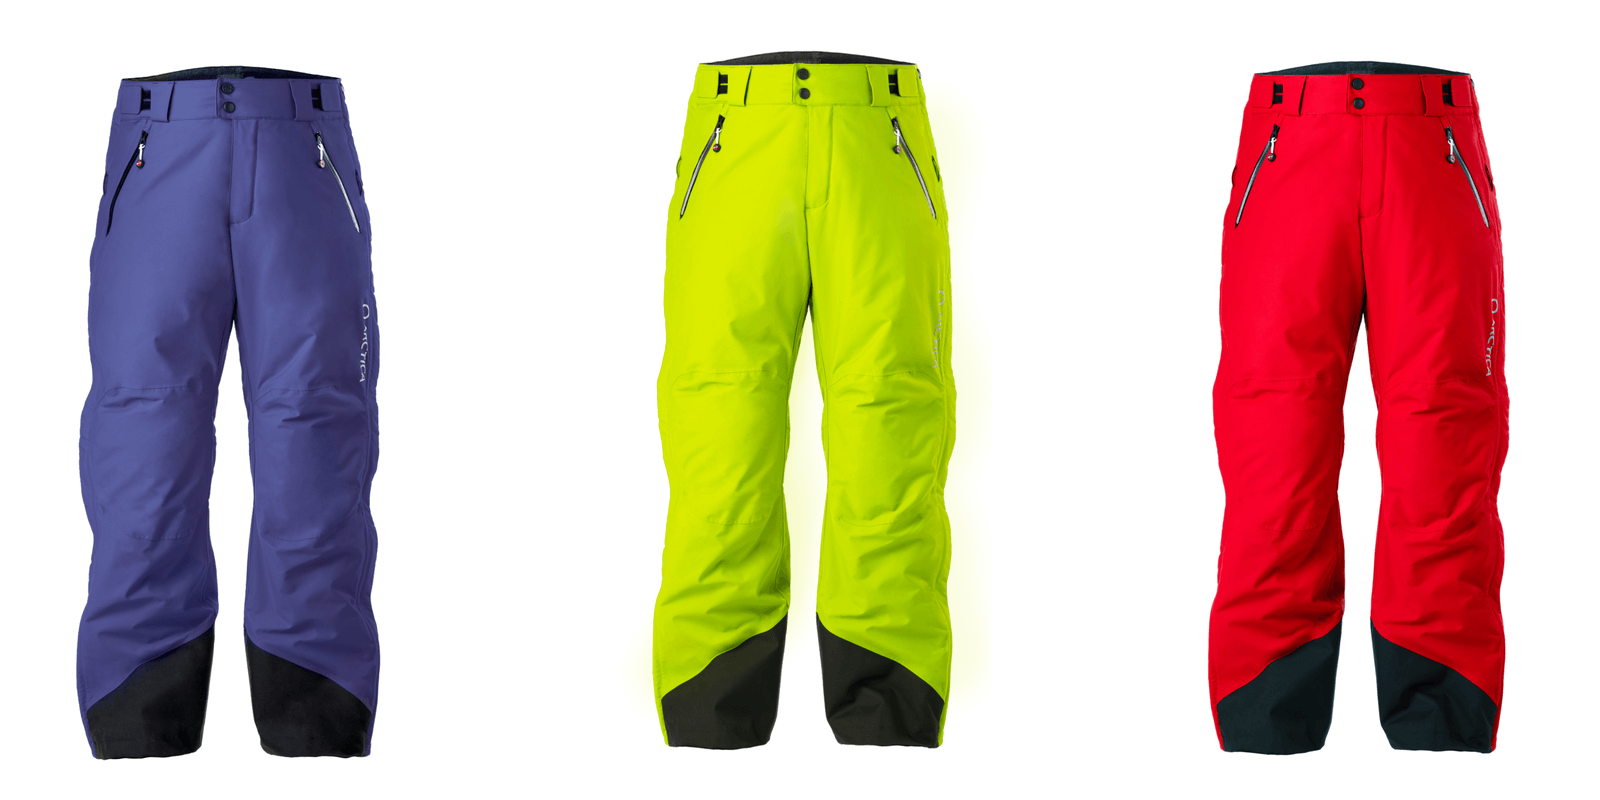 Arctica side zip 2.0 pant colors for 2017-18 Navy, Optic Yellow and Red.